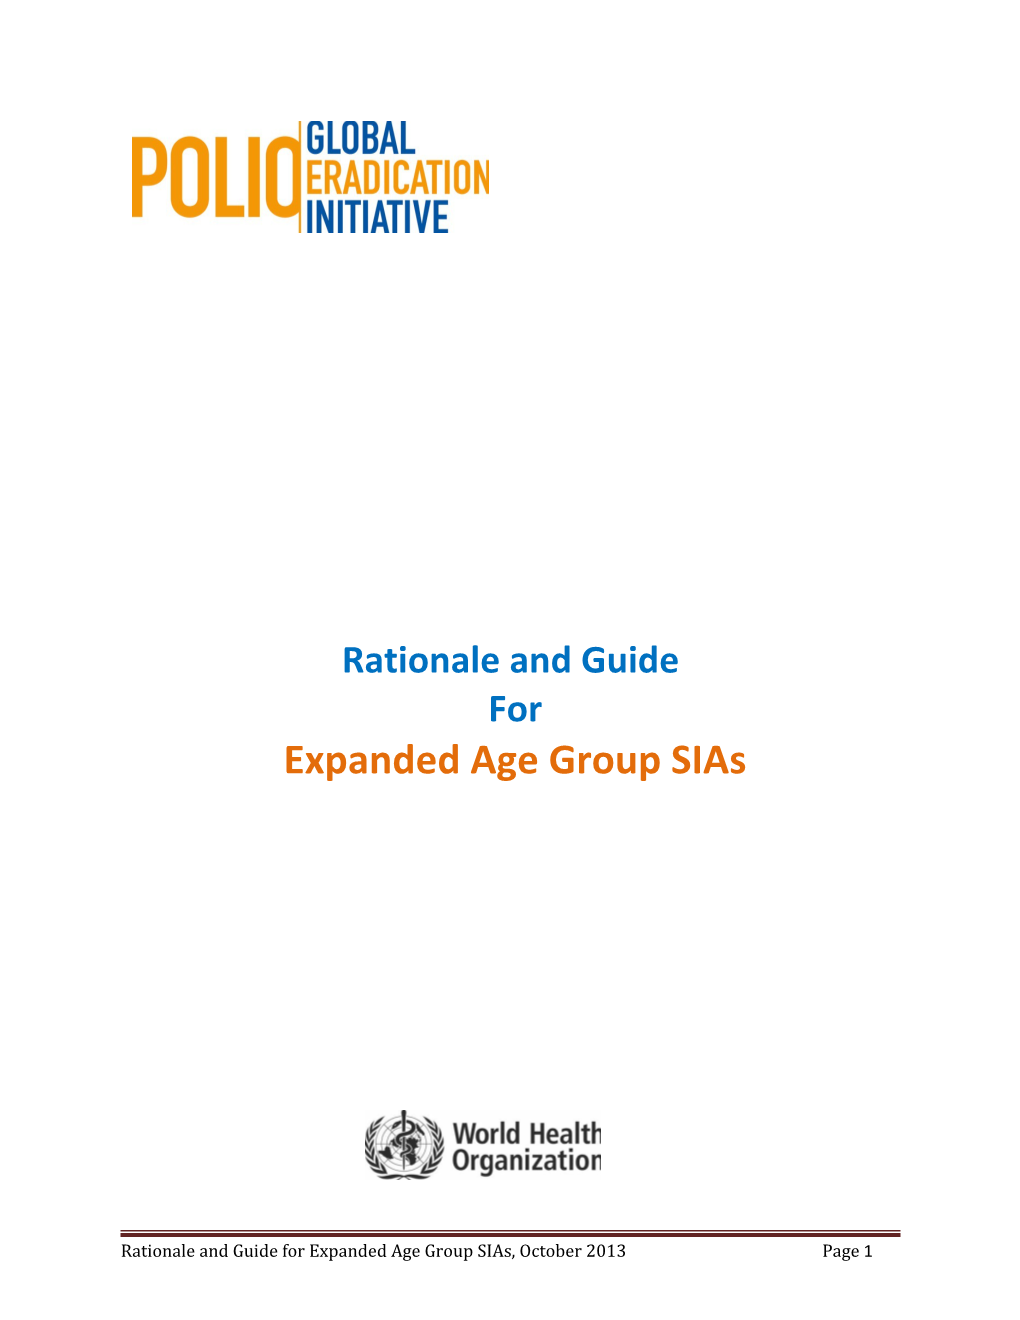 Rationale and Guide for Expanded Age Group Sias